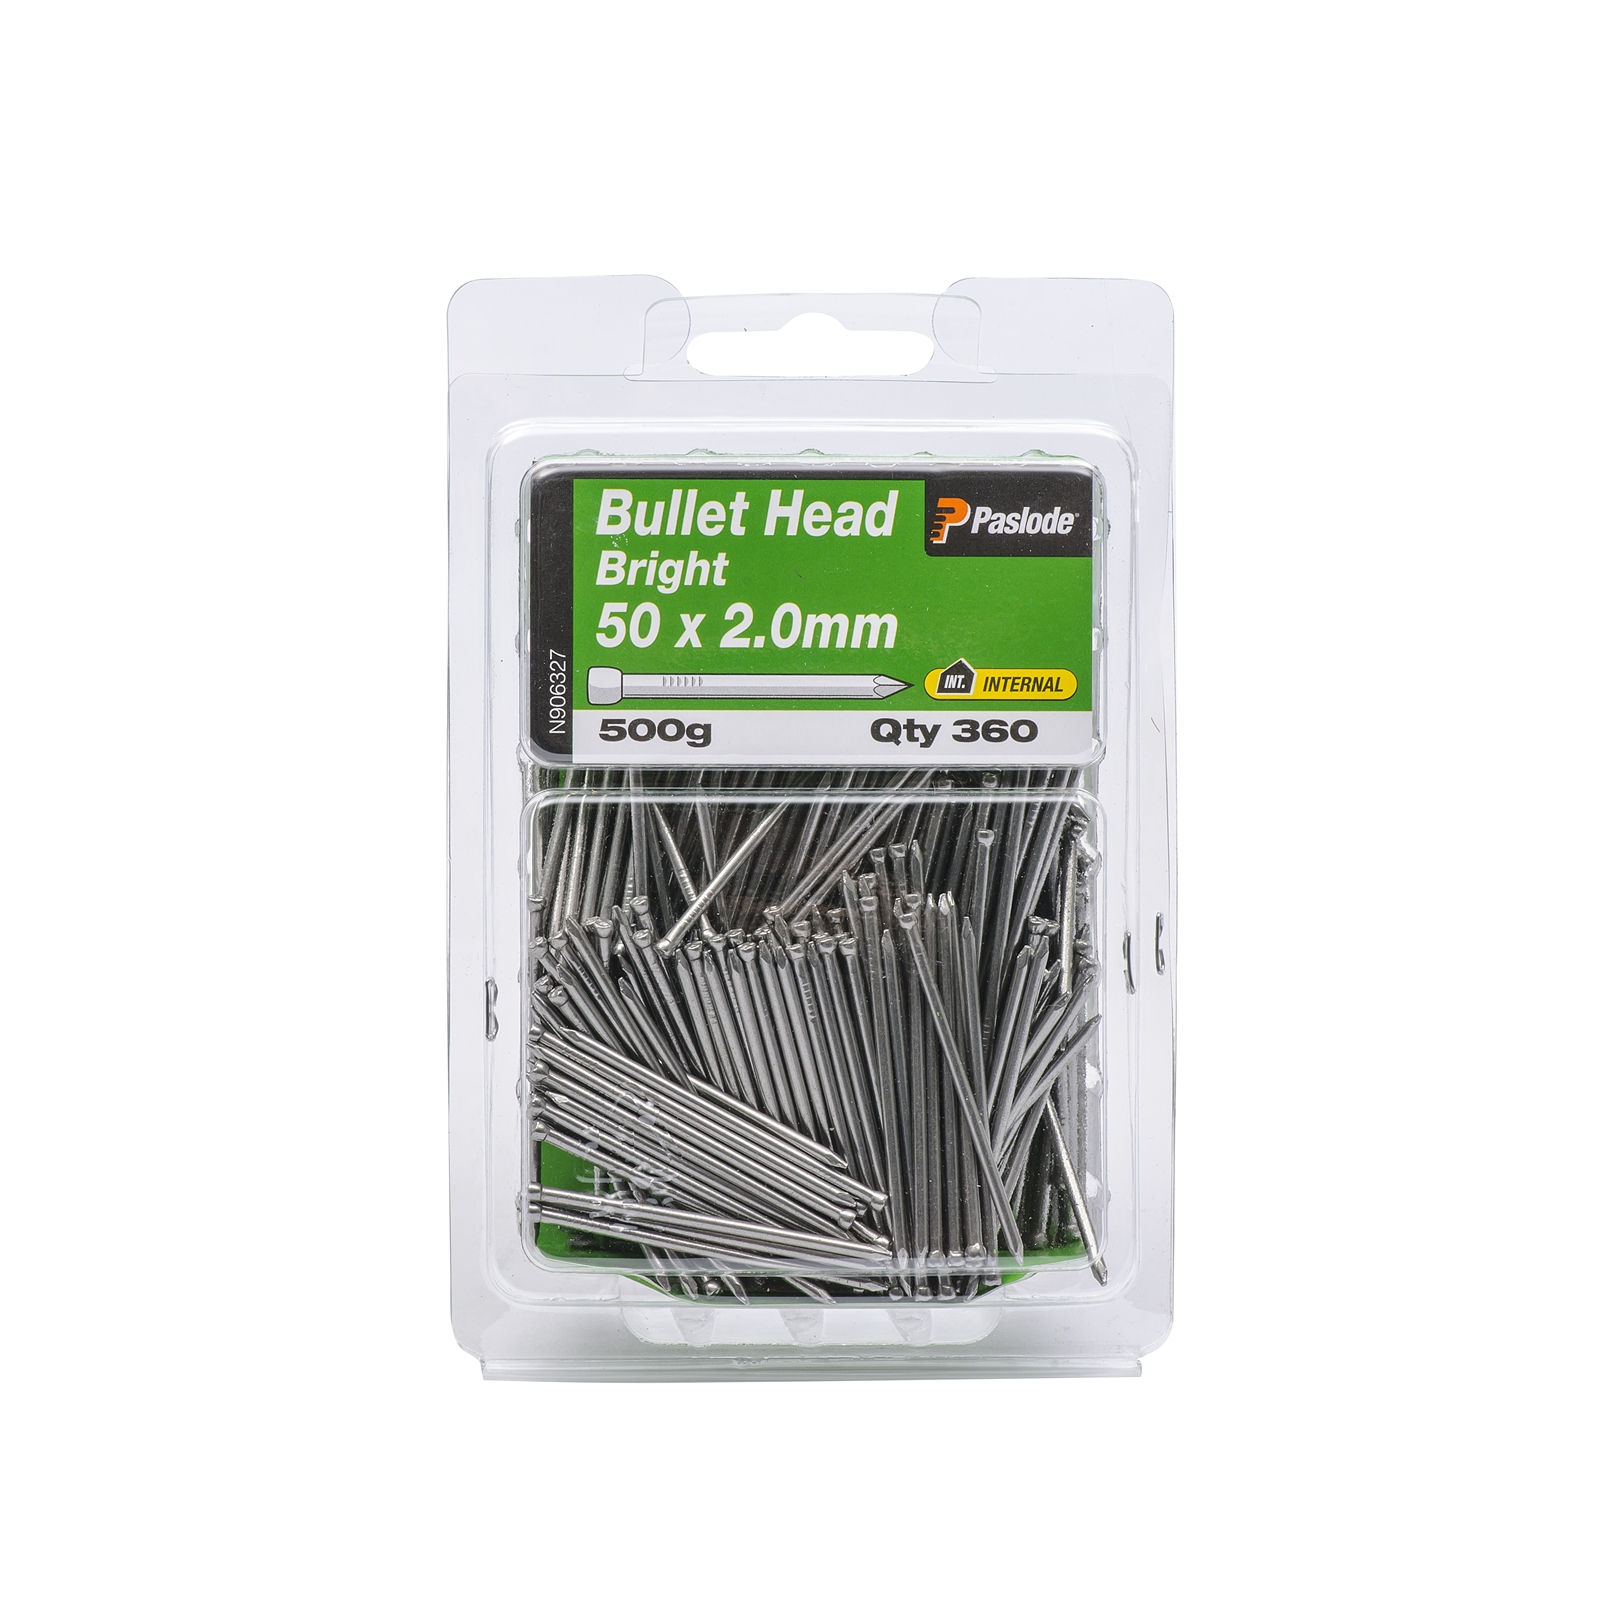 Paslode 50 x 2.0mm 500g Bright Steel Bullet Head Nails - 360 Pack